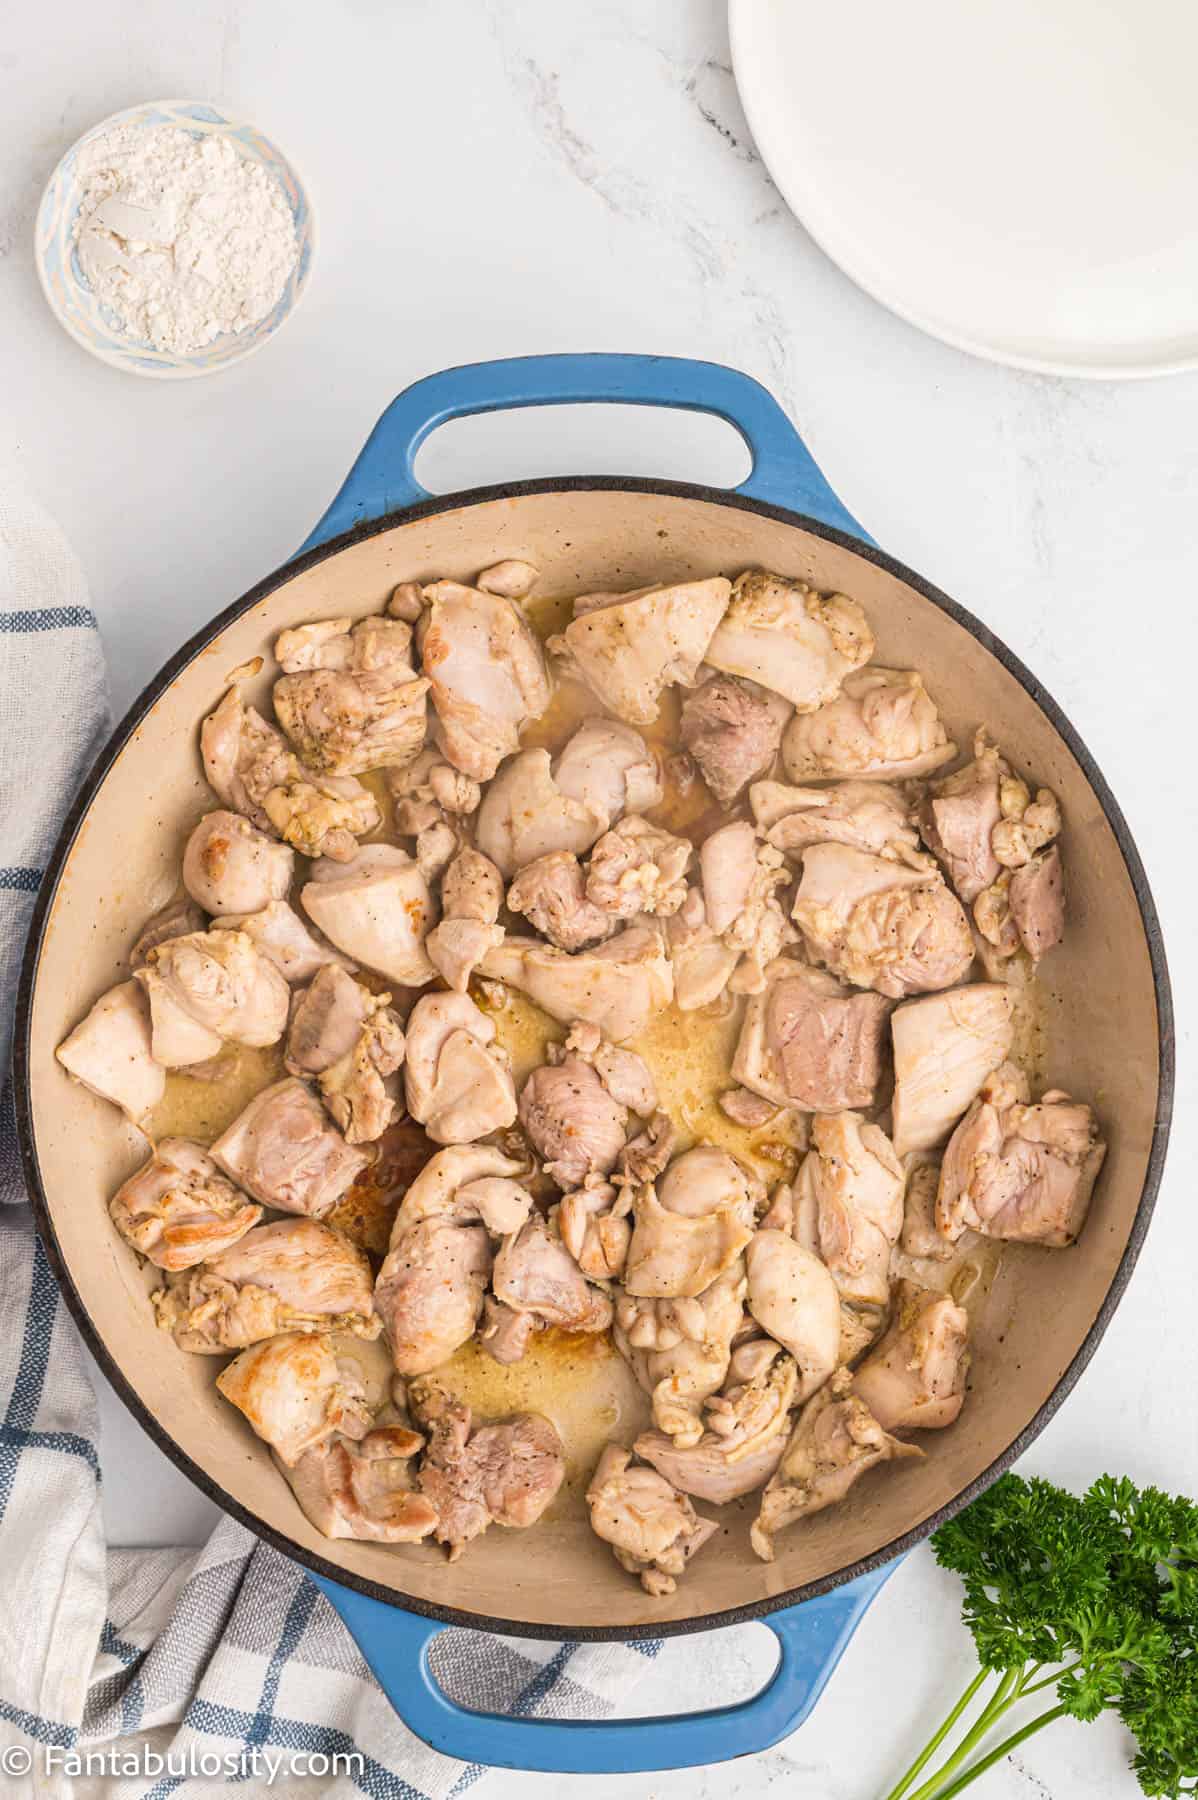 Bite sized pieces of seasoned cooked chicken are shown in a large pan